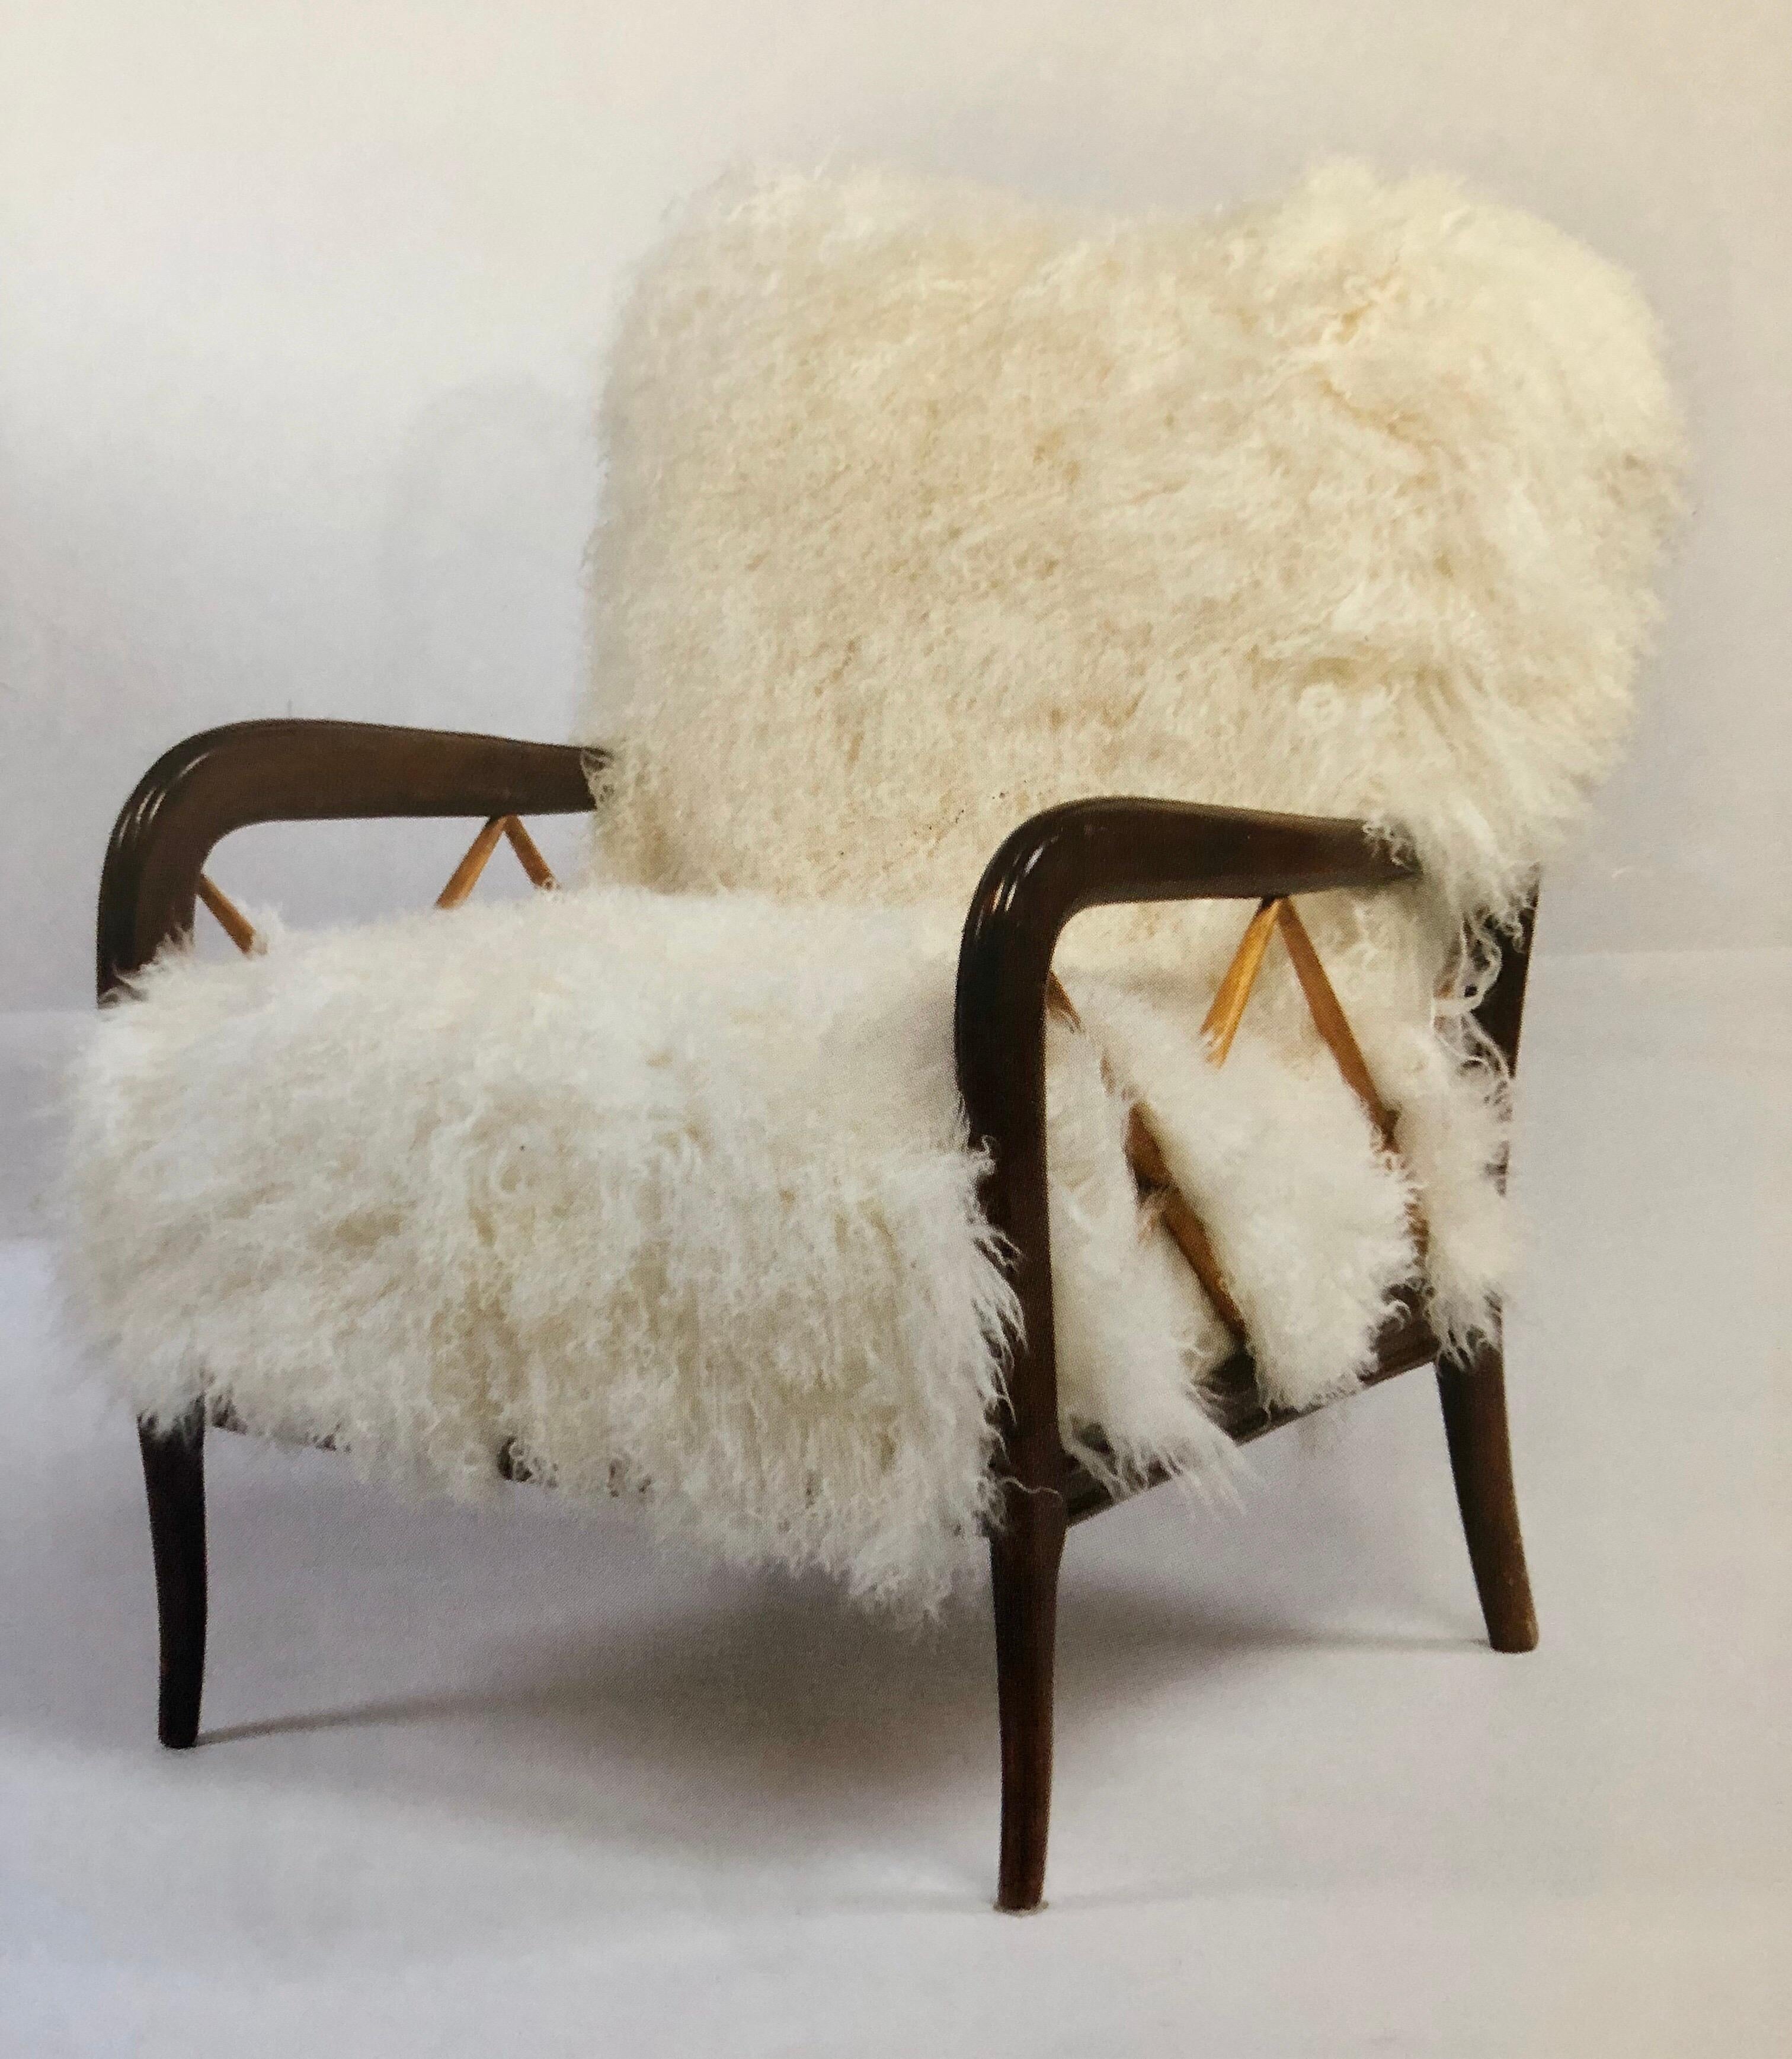 Luxurious pair of Italian Mid-Century Modern neoclassical lounge chairs, armchairs or club chairs circa 1940 by Paolo Buffa (1903-1970). 

The pieces are in walnut and elegantly covered in sheepskin. They feature a chic X-frame design supporting